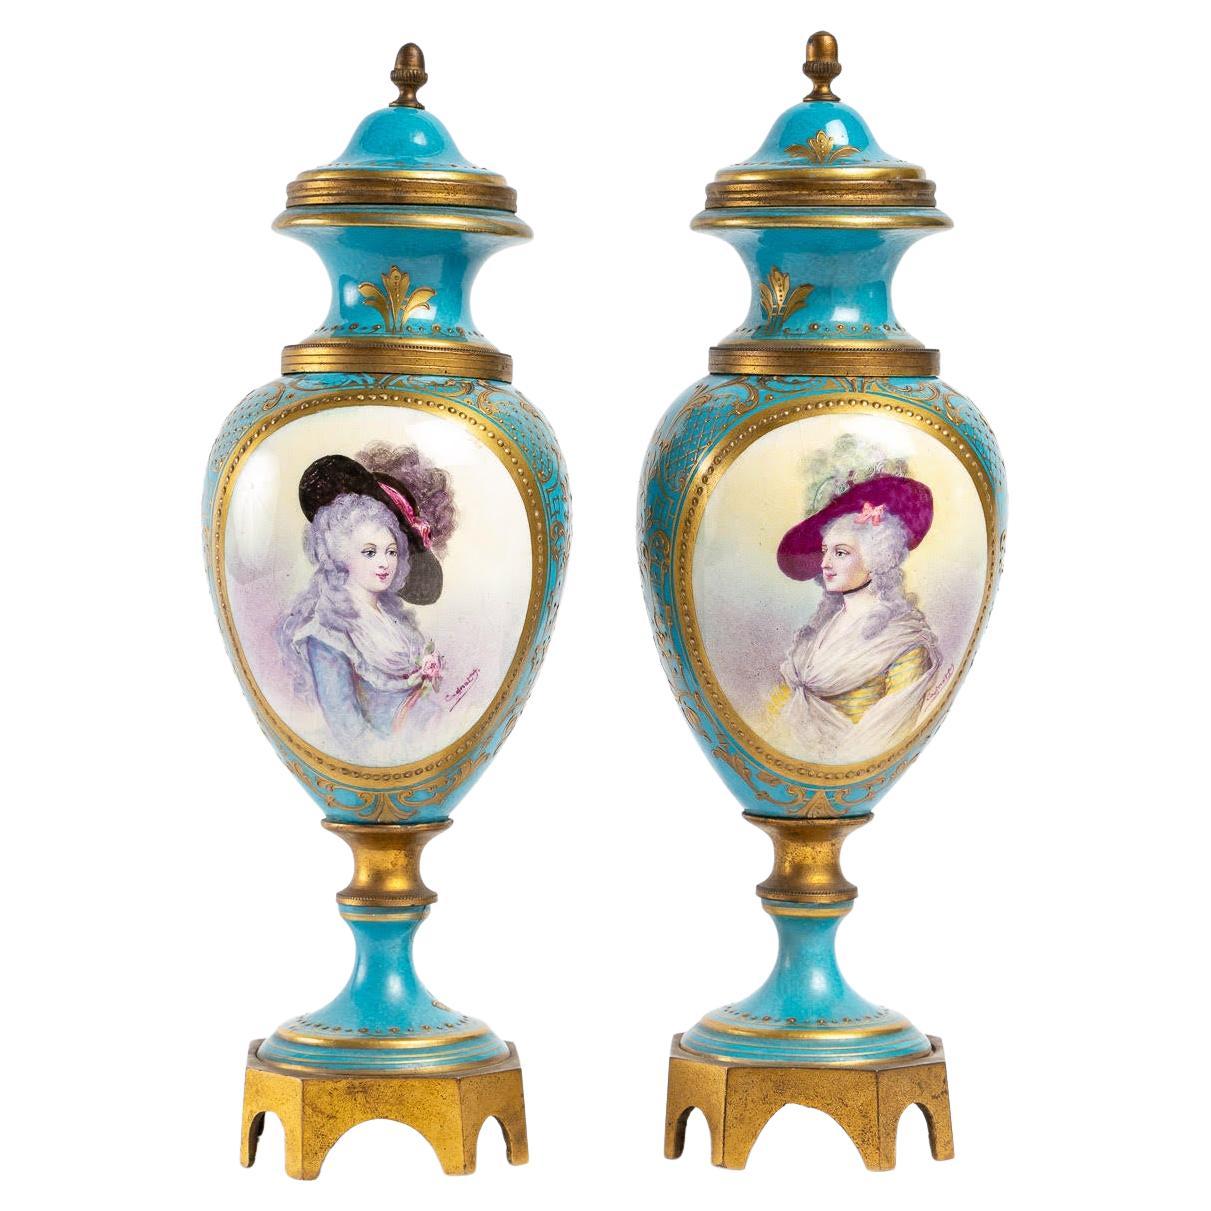 Pair of Small Vases in Sevres Porcelain